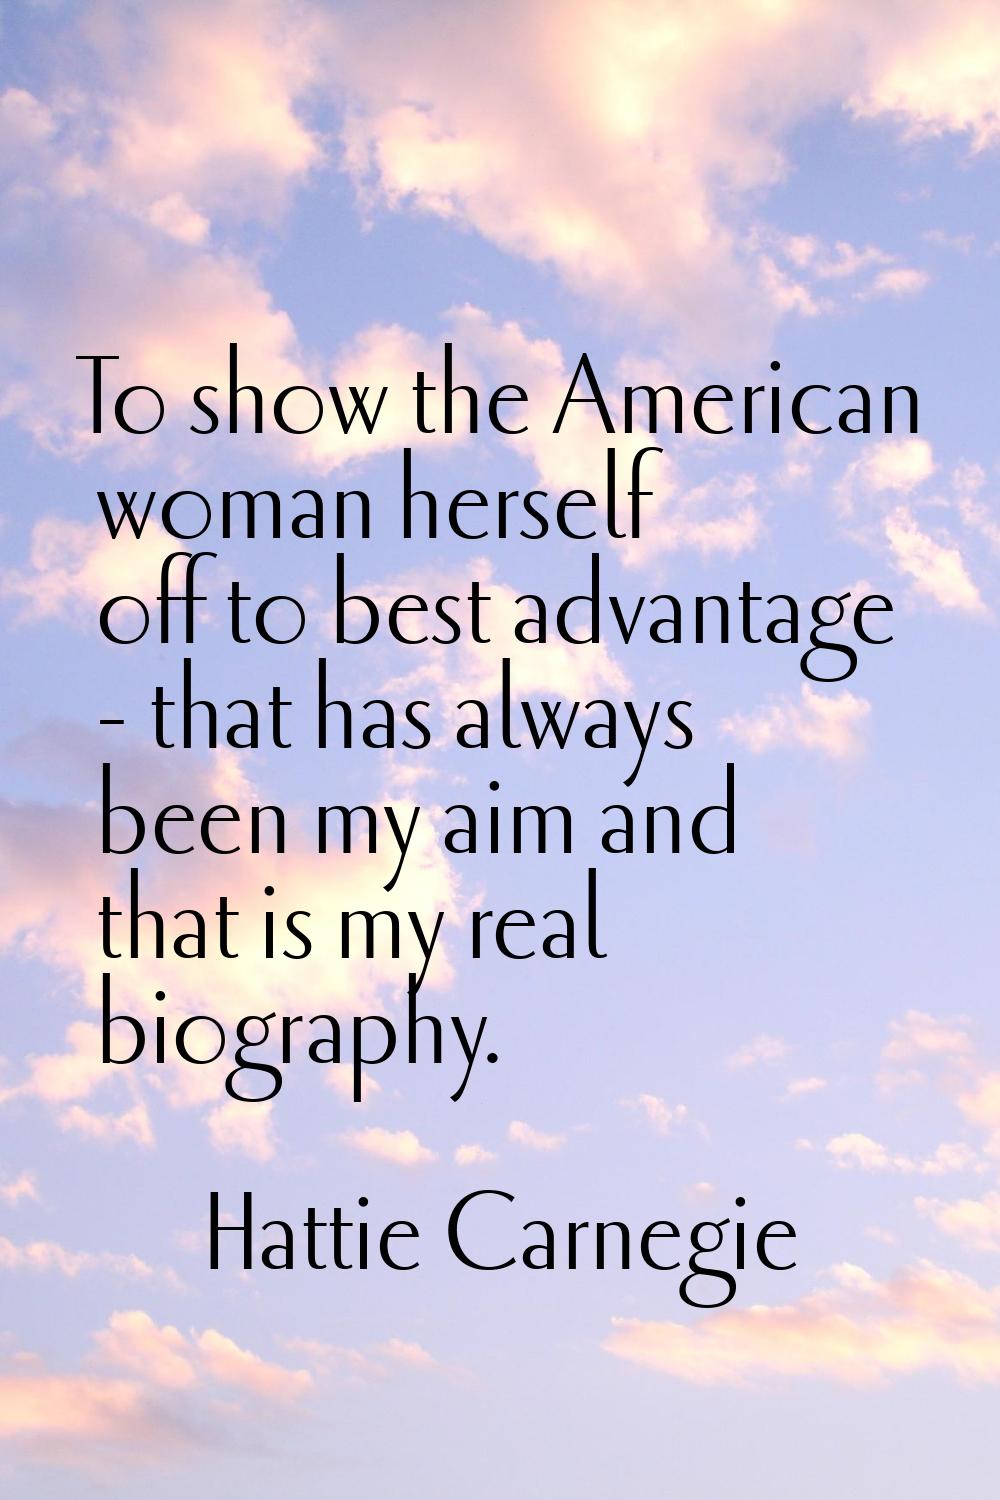 To show the American woman herself off to best advantage - that has always been my aim and that is 